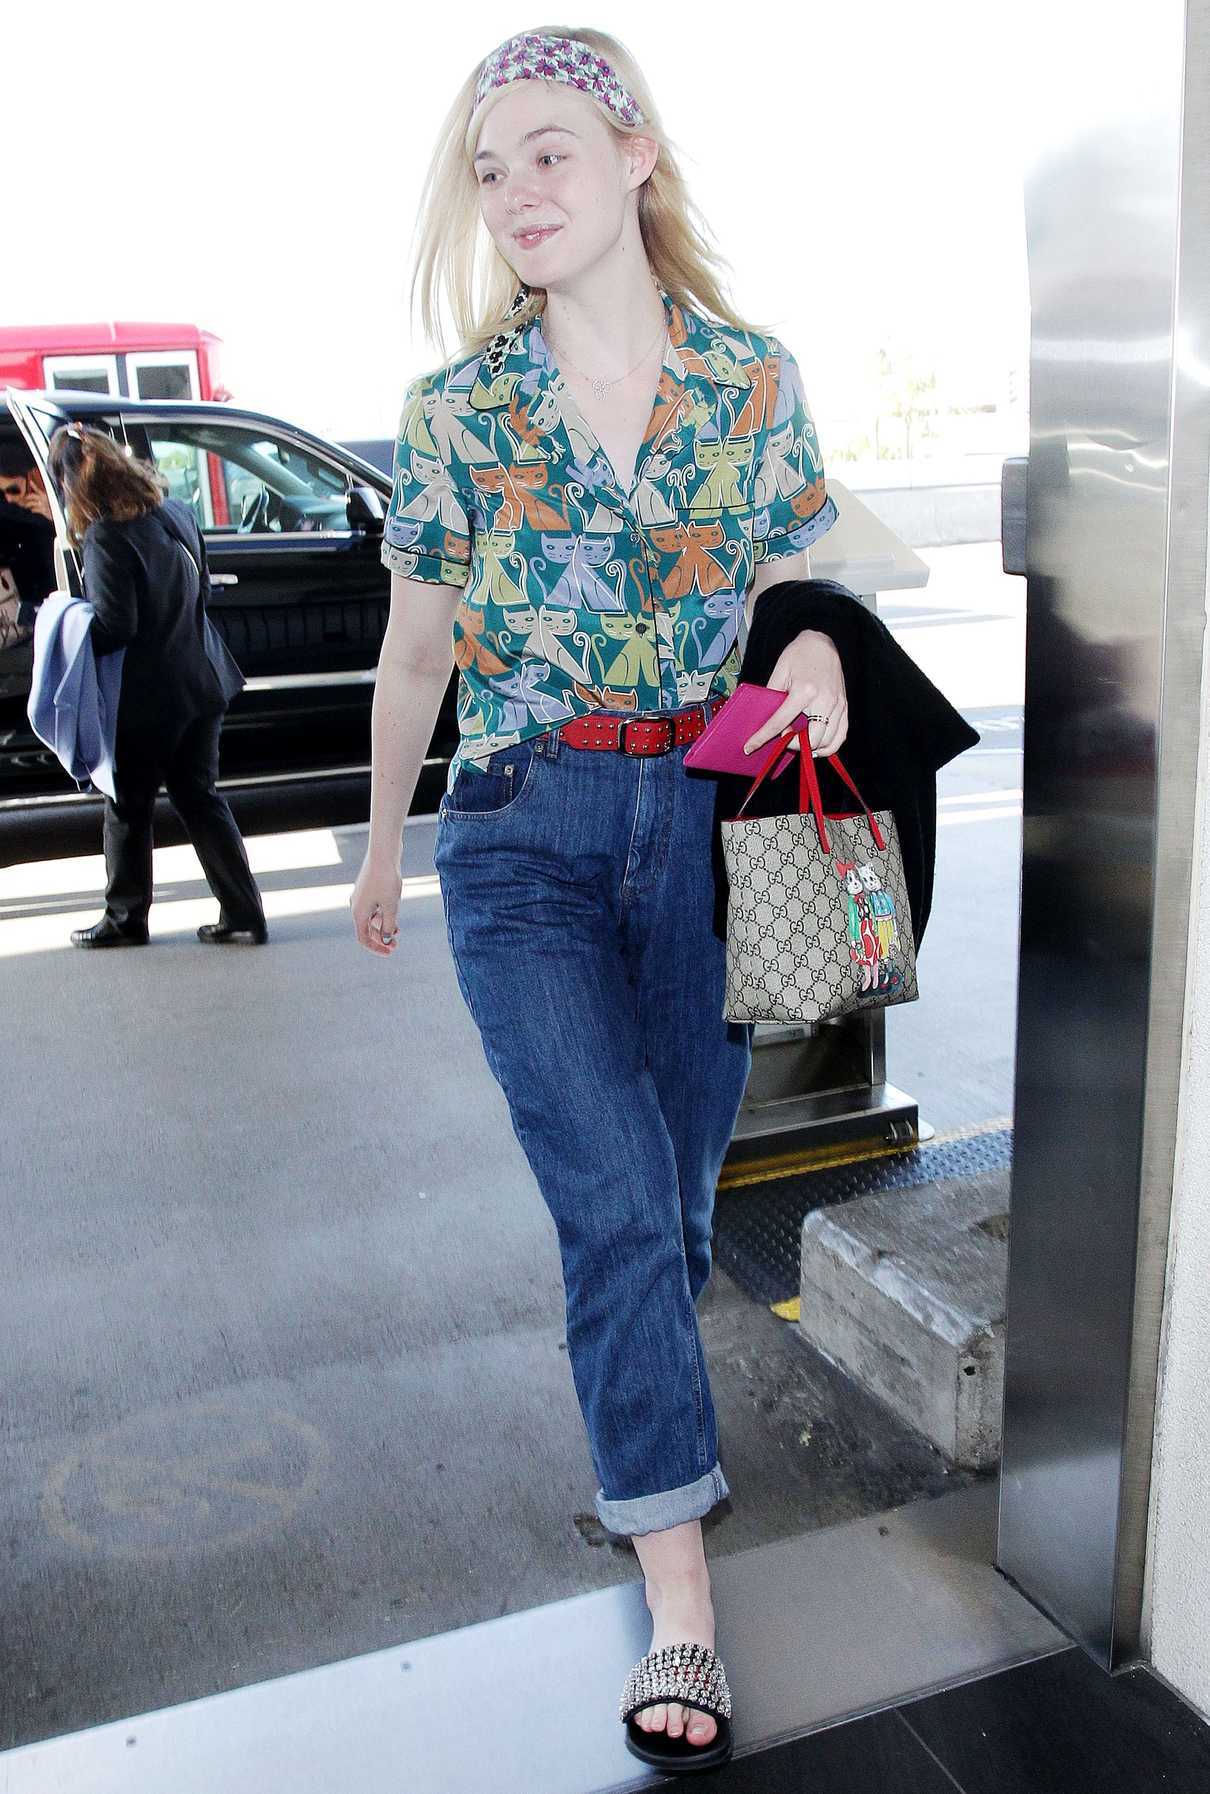 Elle Fanning Wears a Colorful Cat Patterned Shirt at LAX Airport in LA 04/20/2018-3